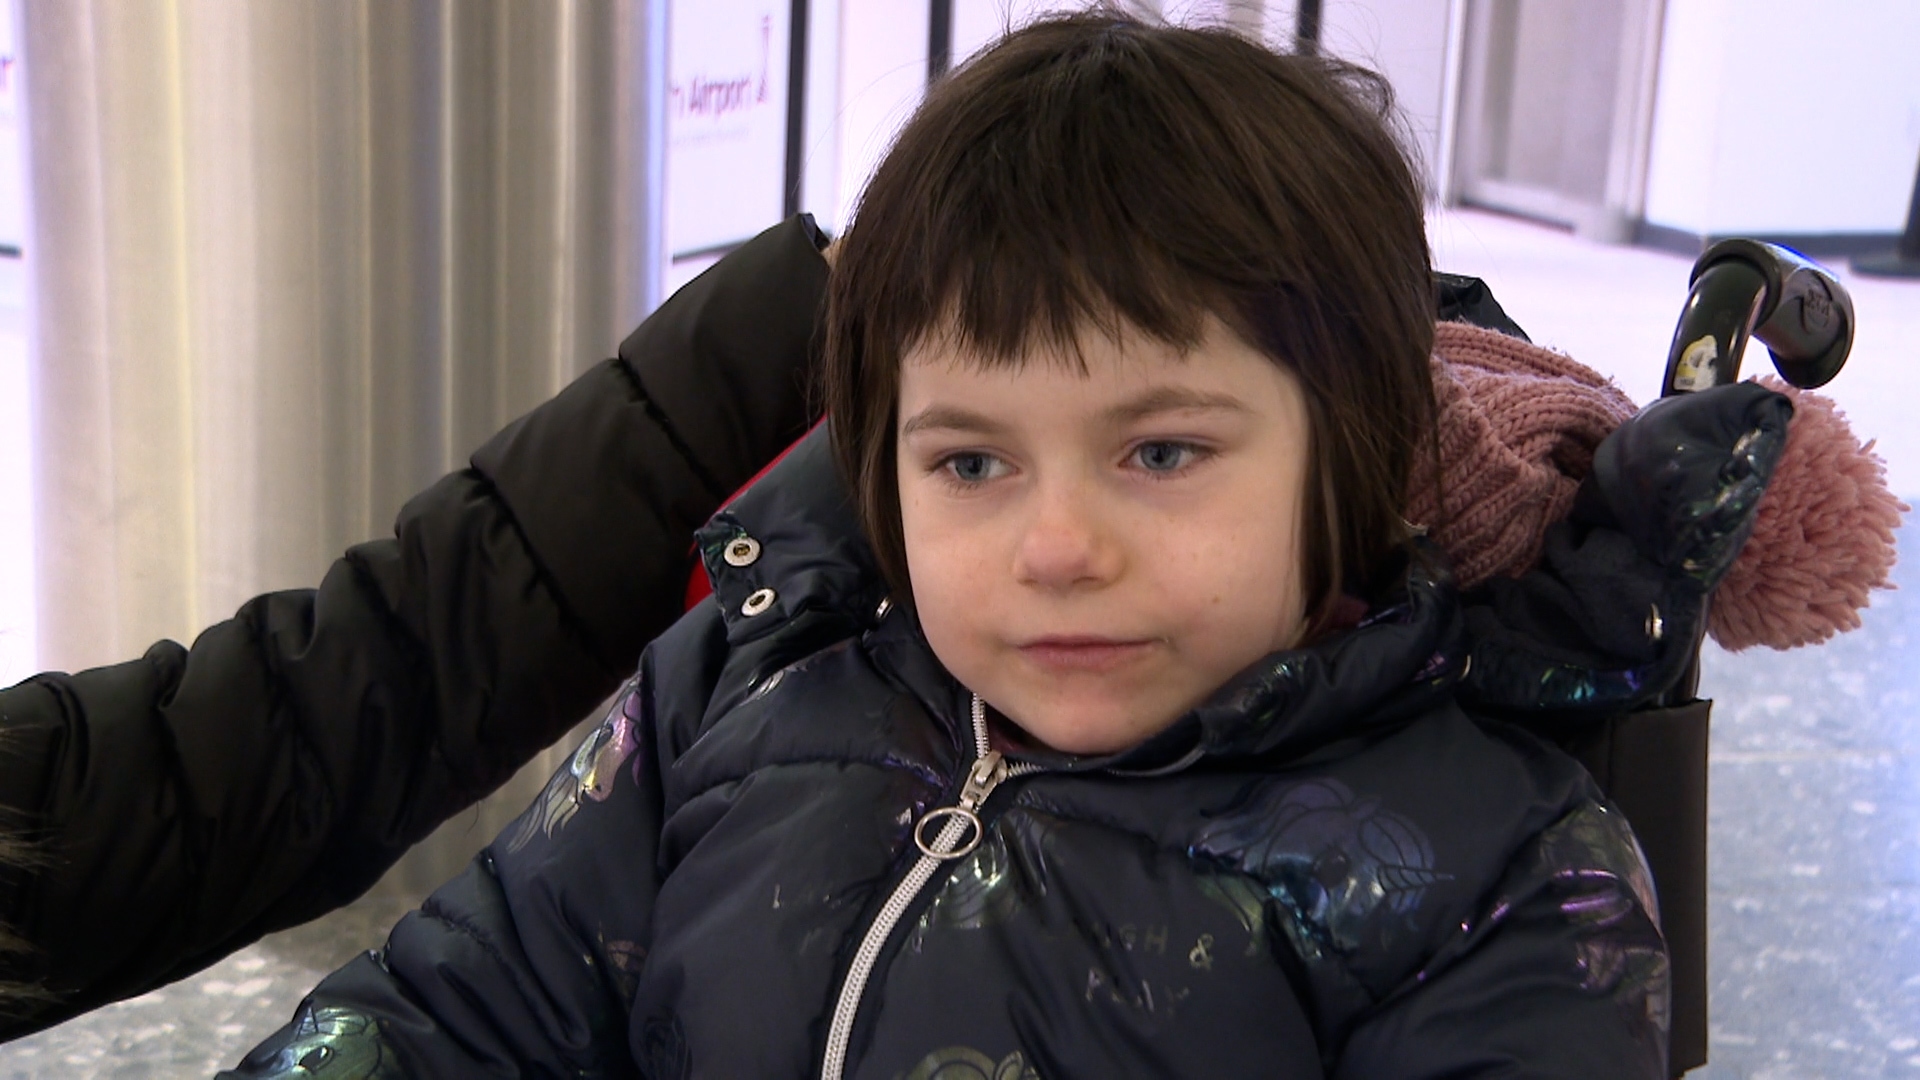 Arabella is back home after undergoing pioneering surgery in Poland.